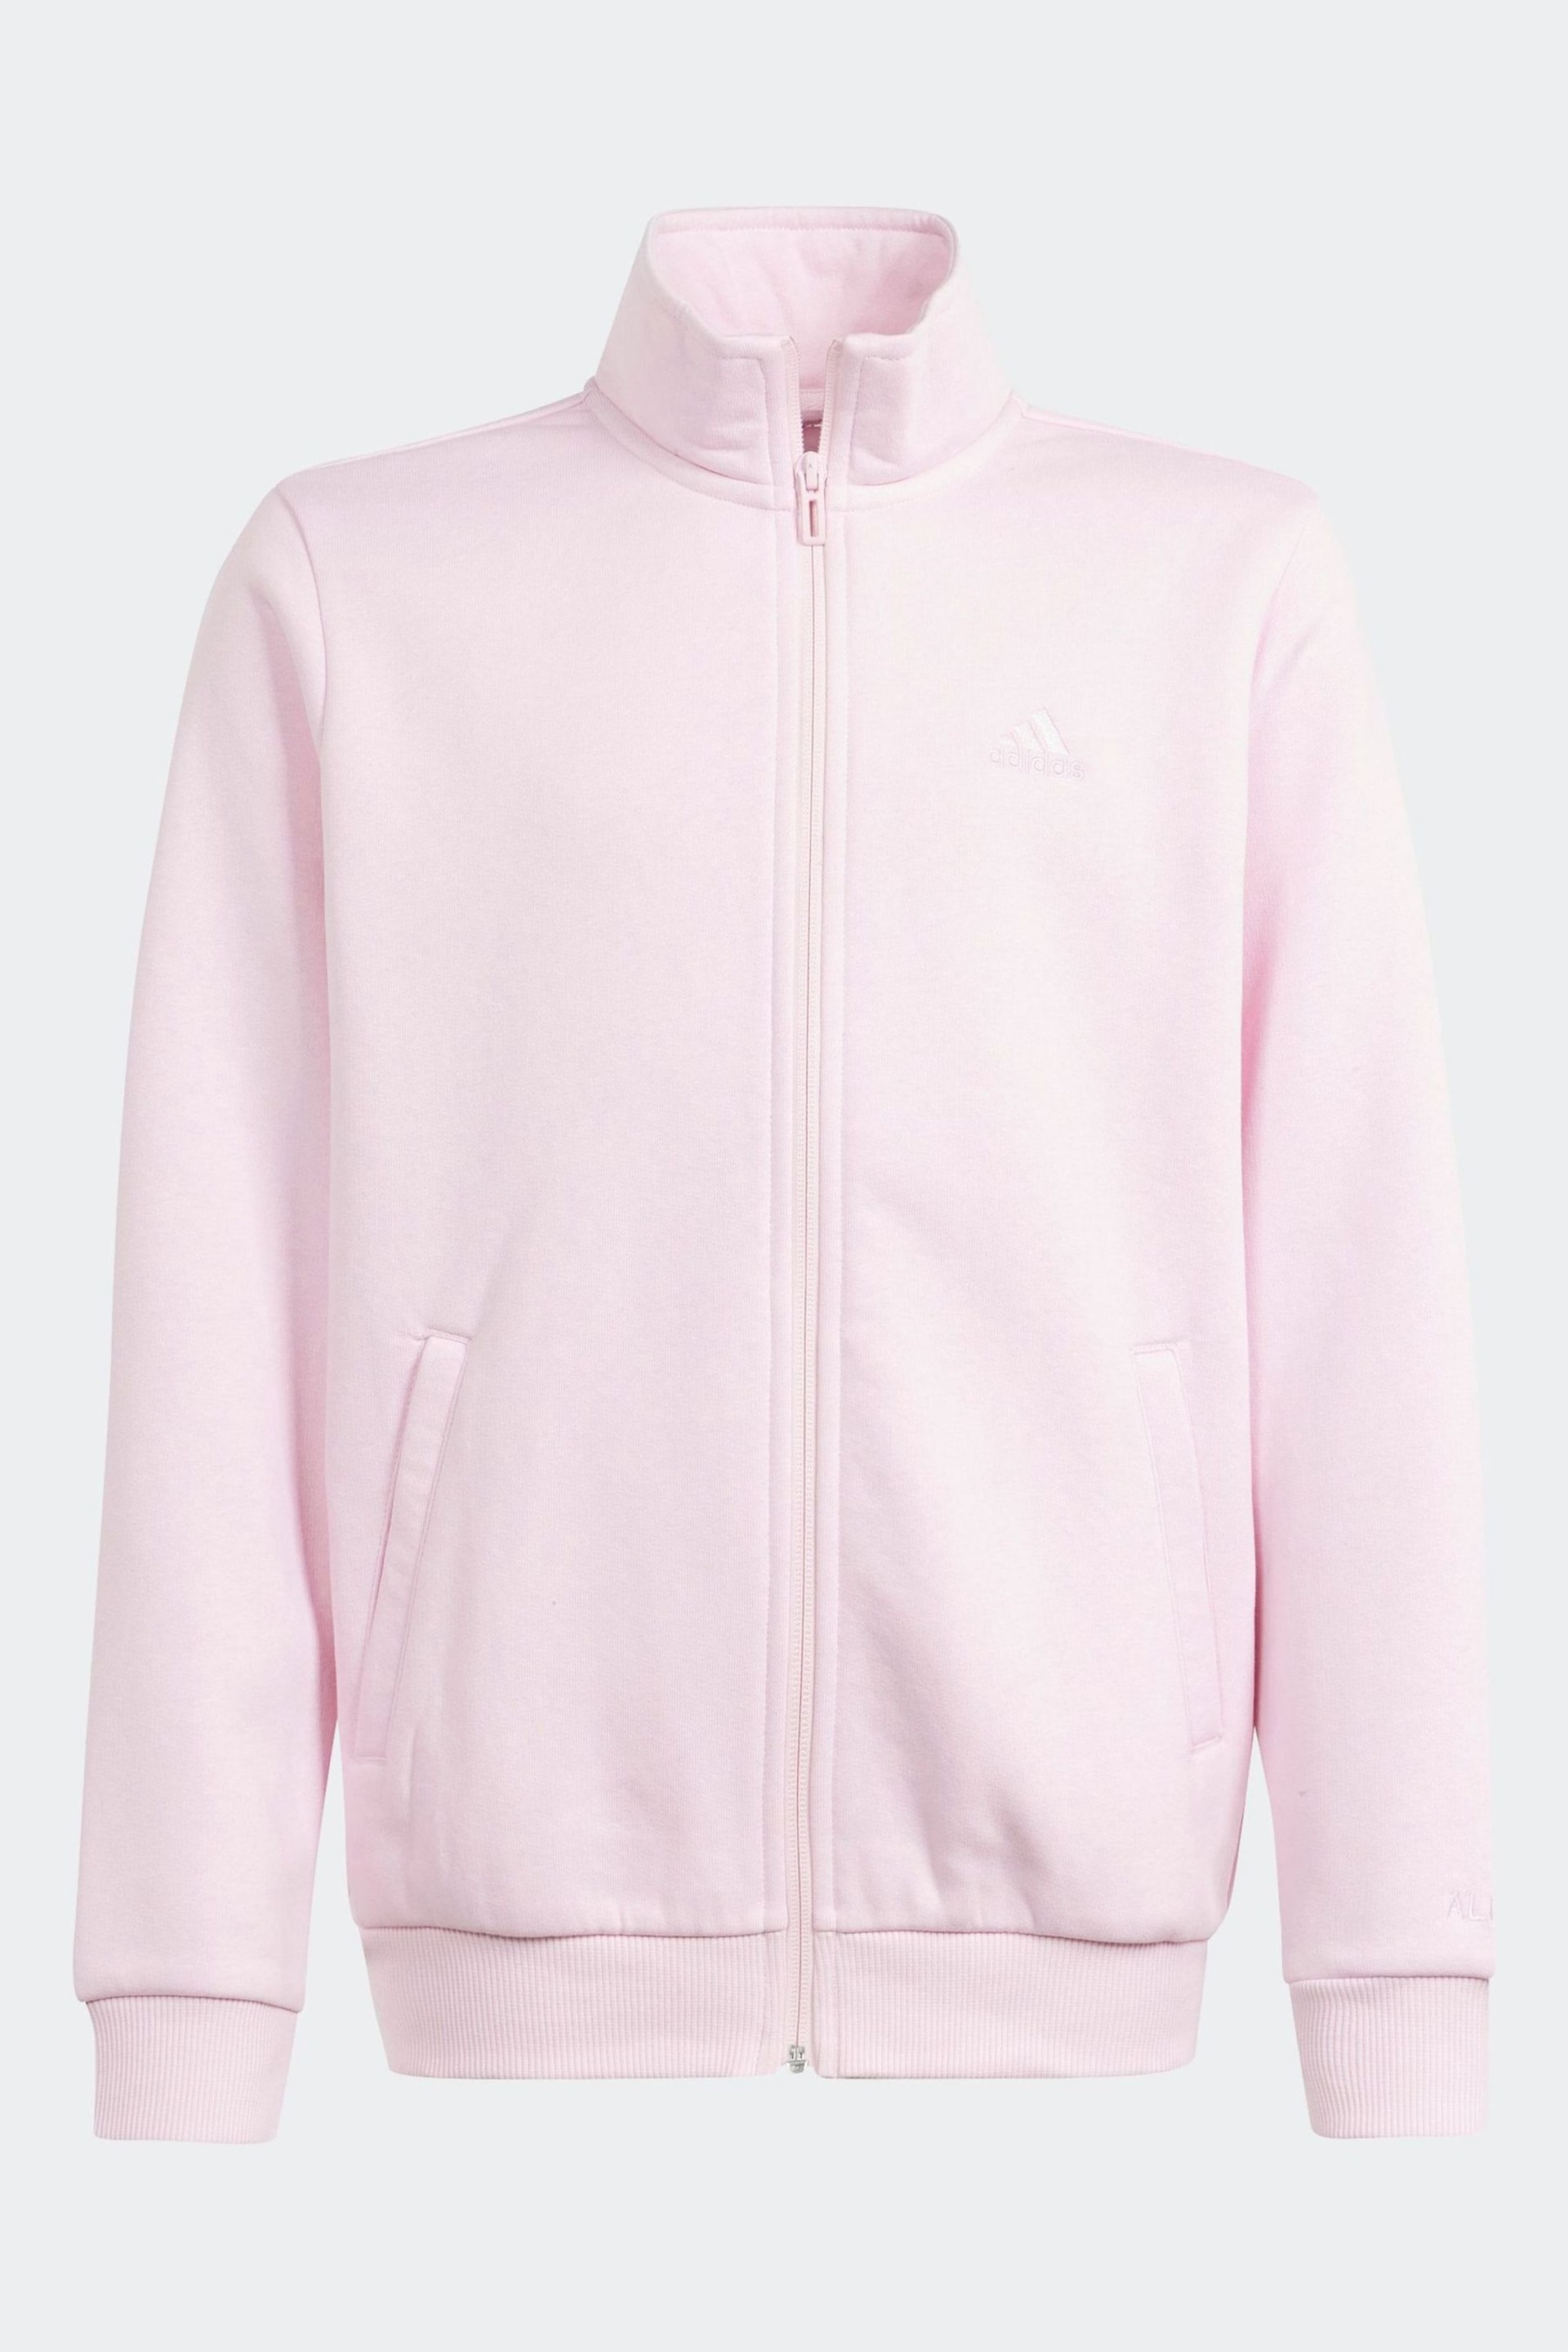 adidas Pink Kids Sportswear All Szn Graphic Tracksuit - Image 3 of 6